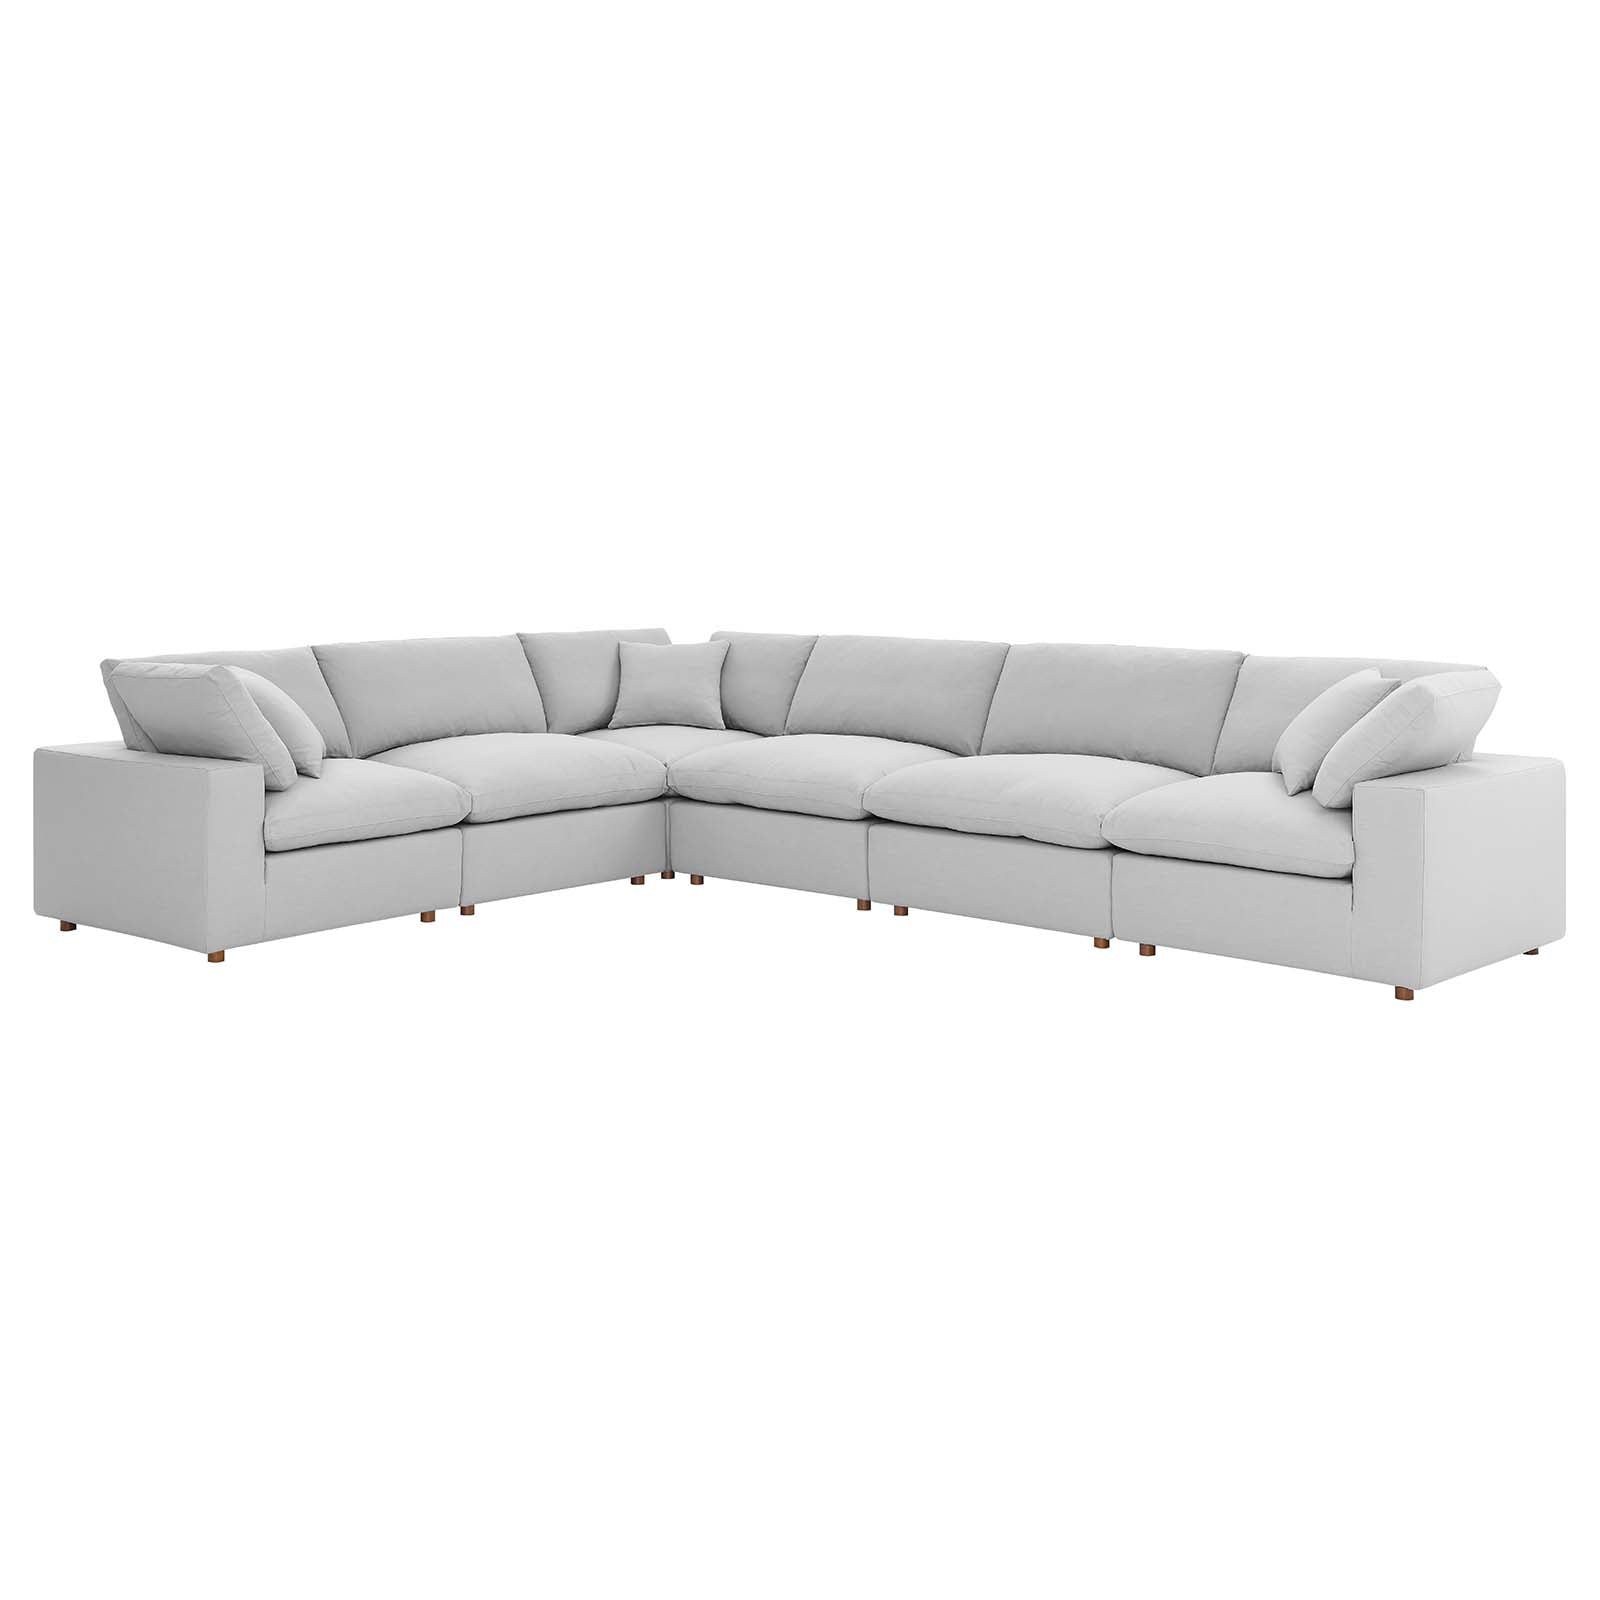 Modway Sectional Sofas - Commix-Down-Filled-Overstuffed-6-Piece-Sectional-Sofa-Set-Light-Gray